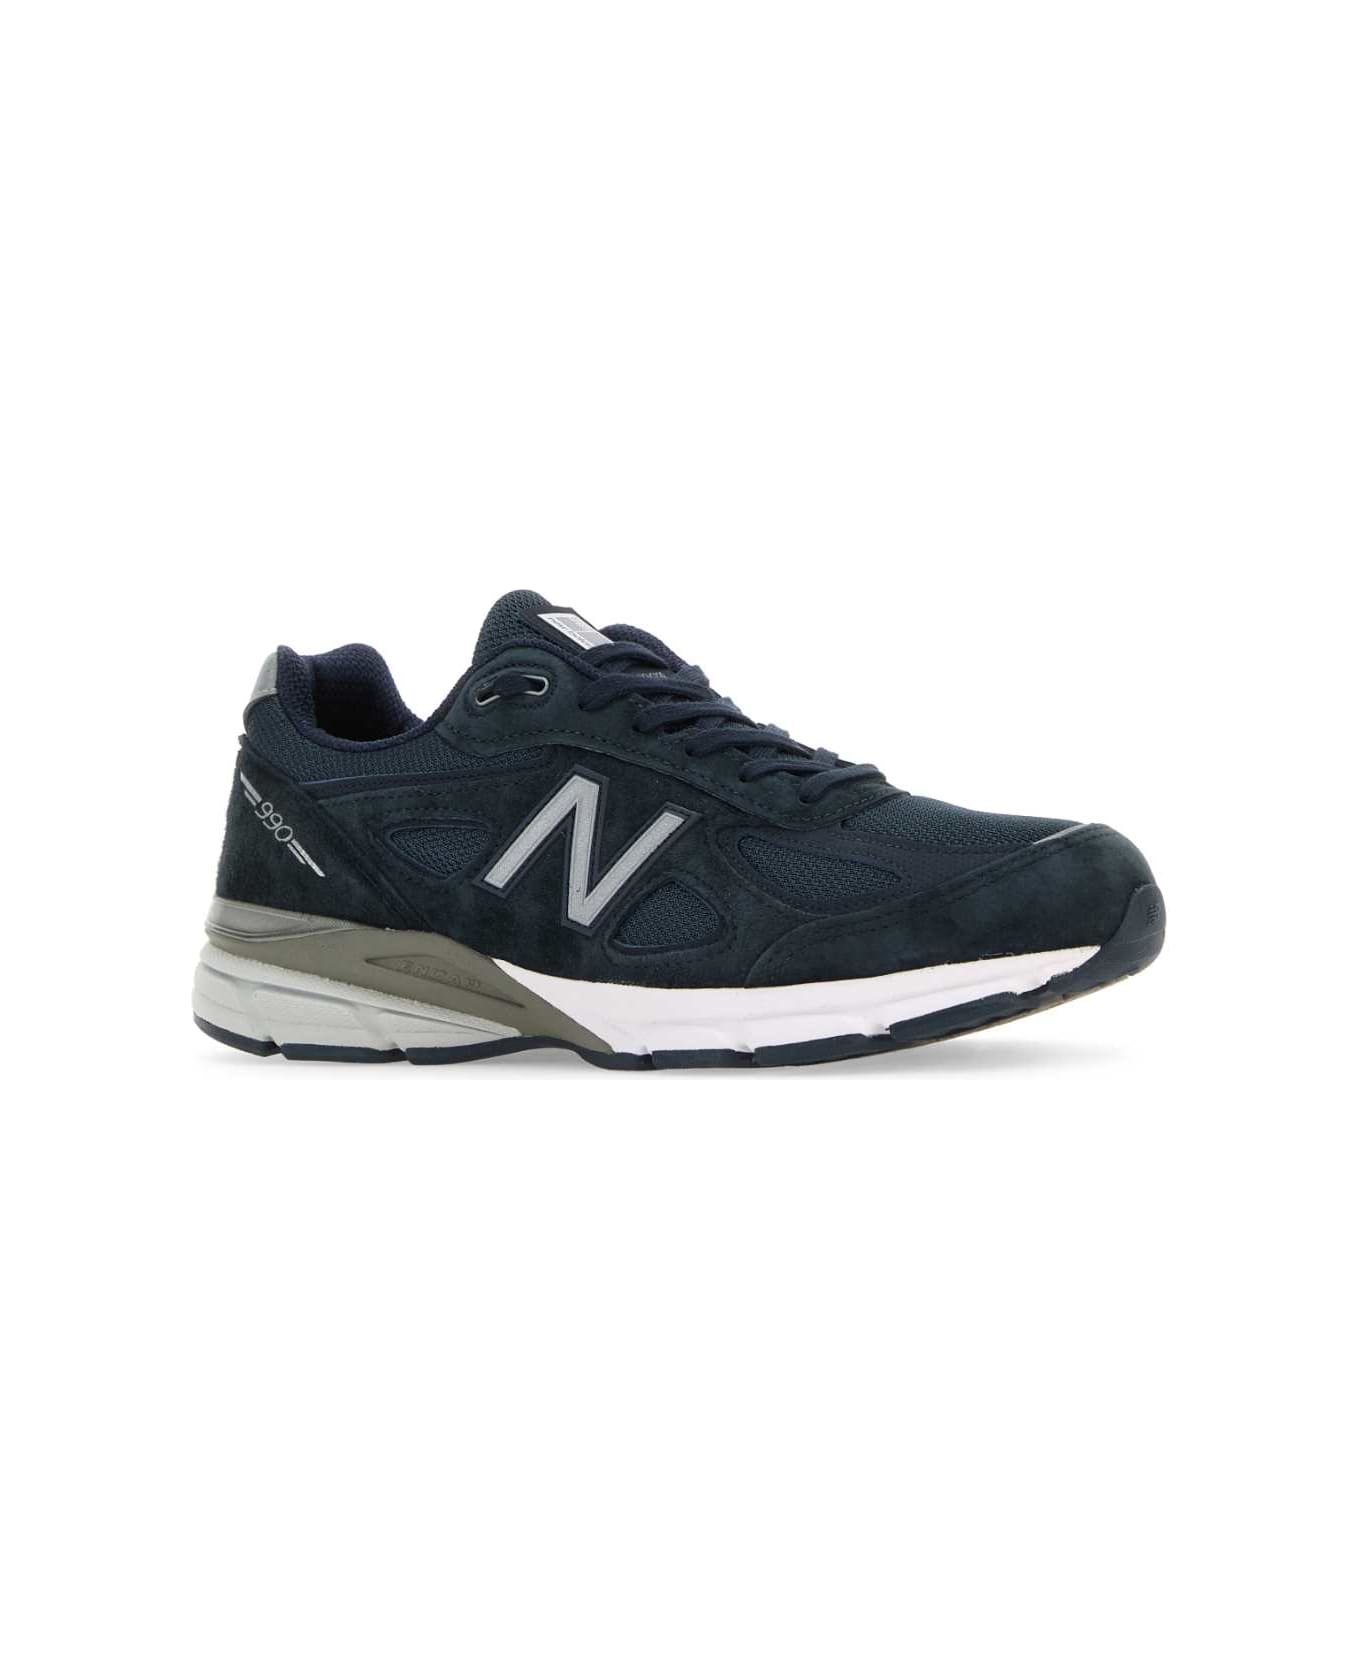 New Balance Blue Fabric And Suede 990v4 Sneakers - NAVY